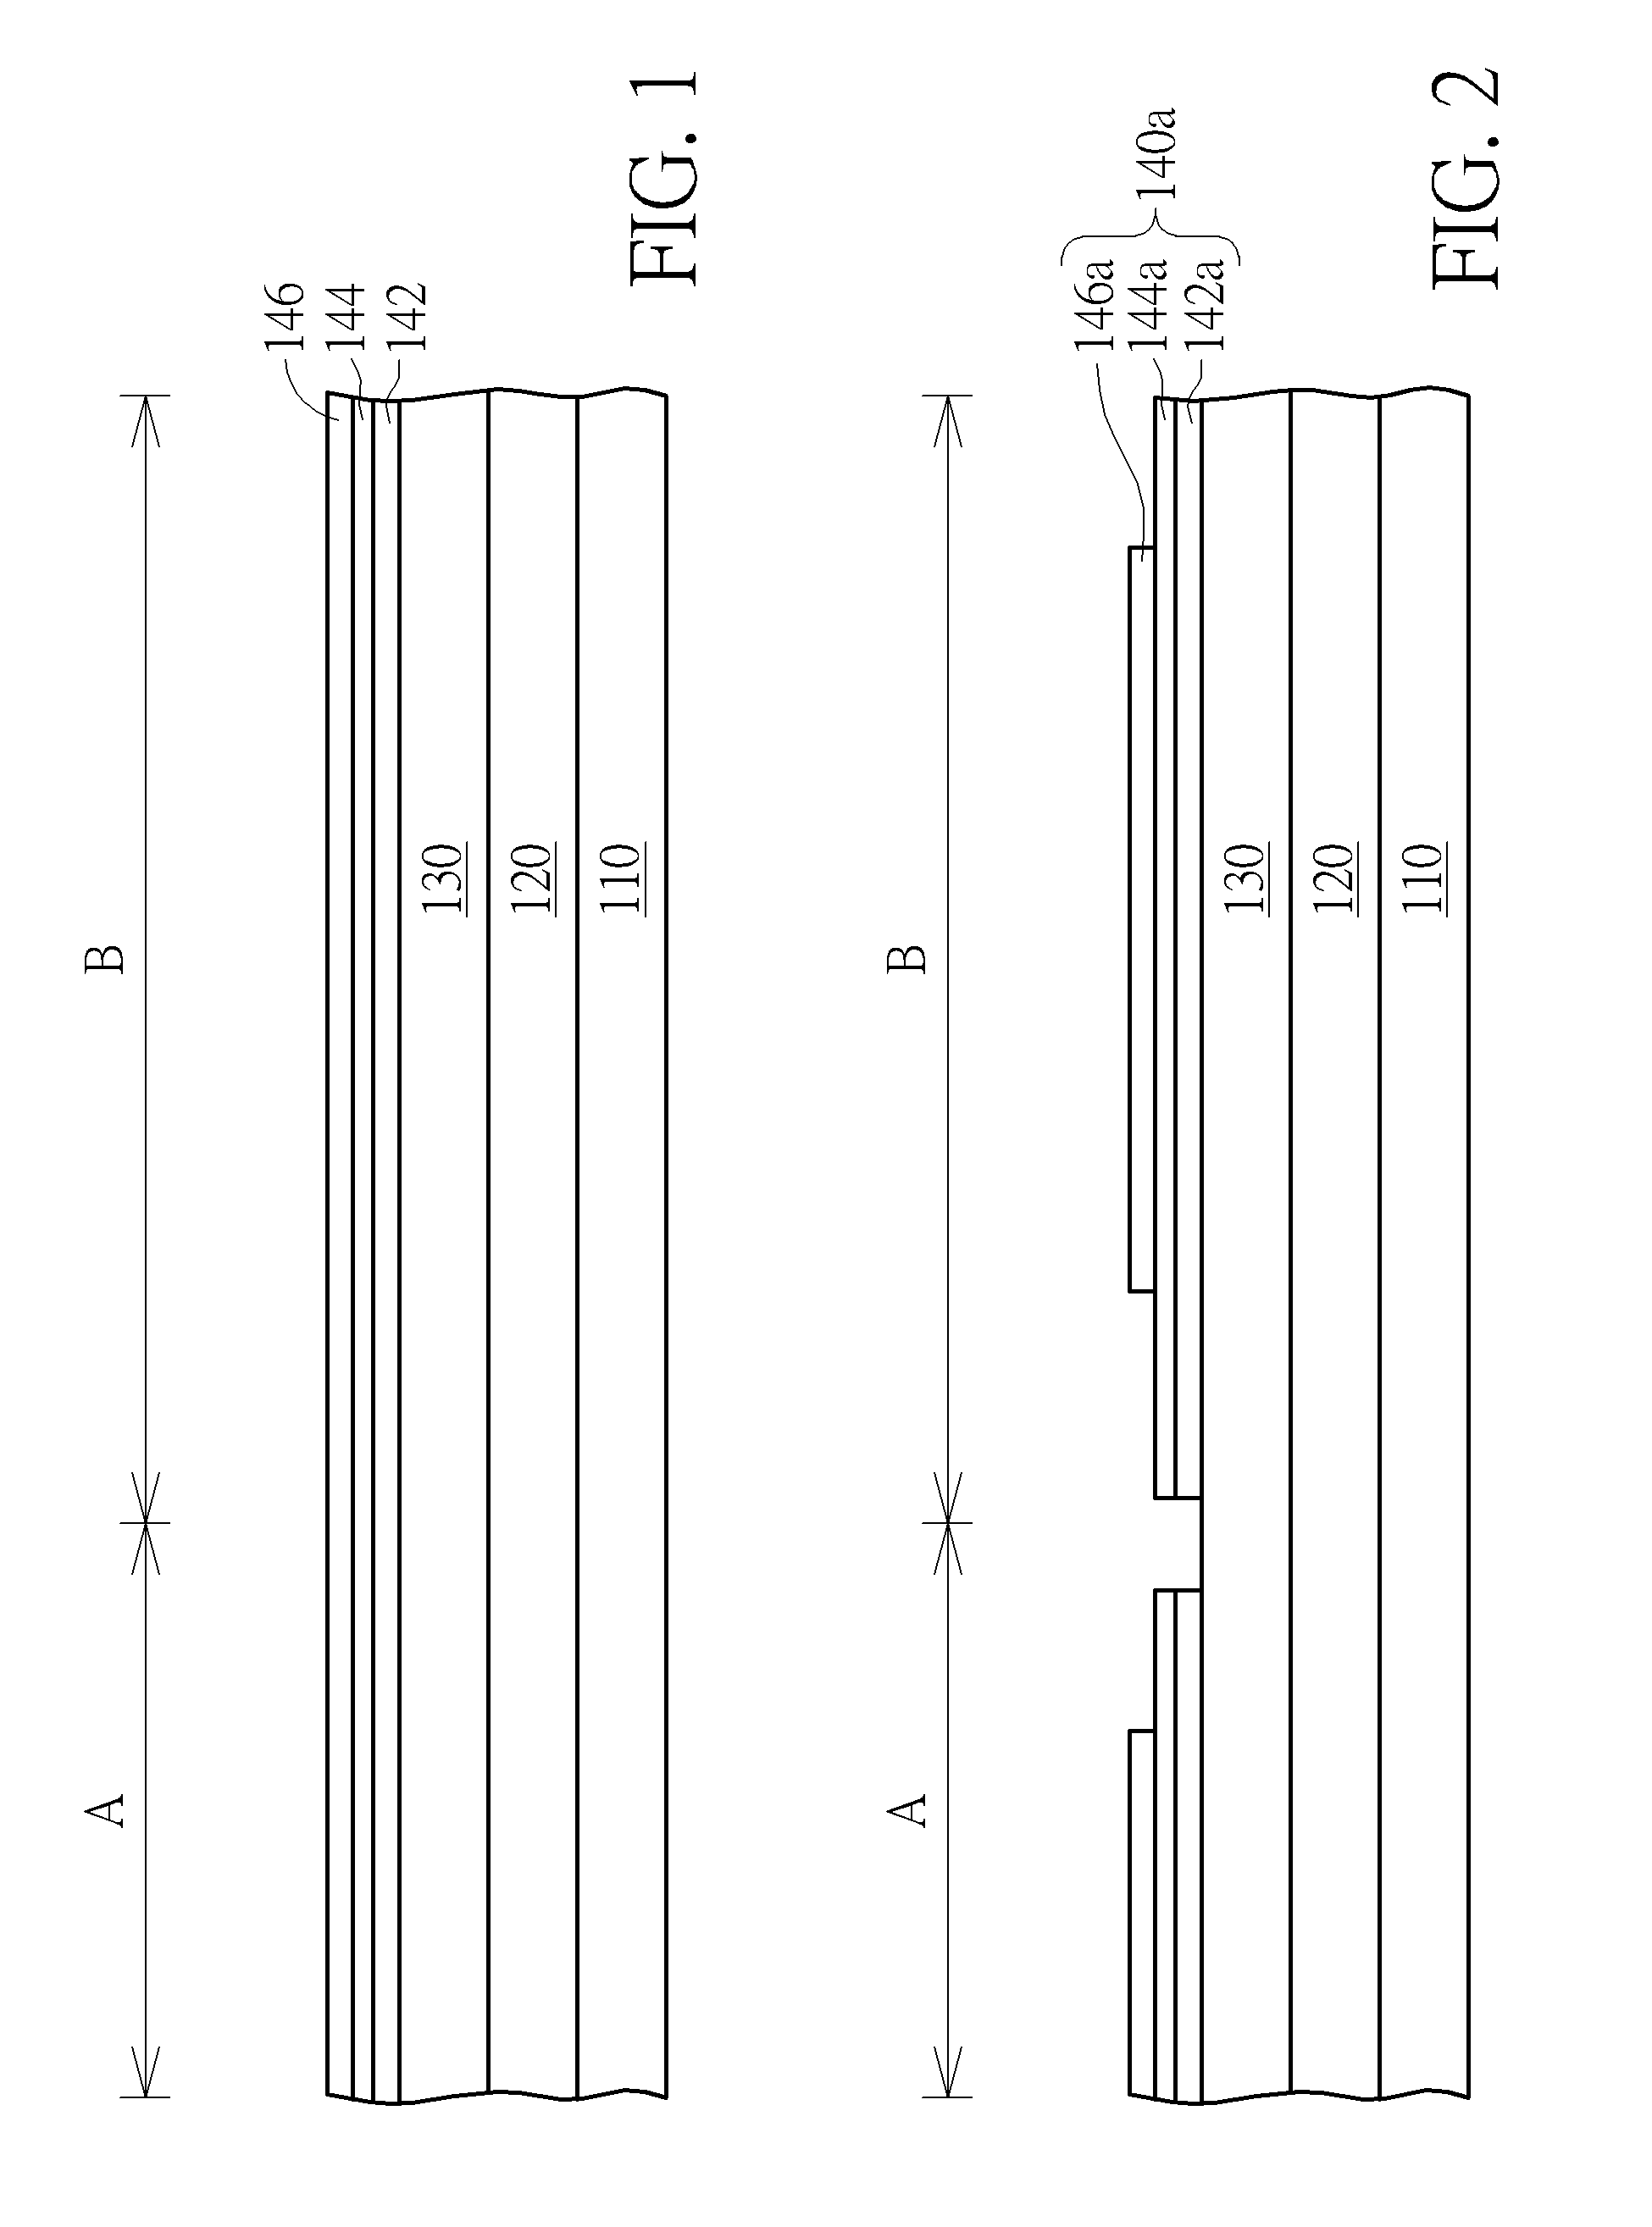 Integrated circuit and method of forming integrated circuit